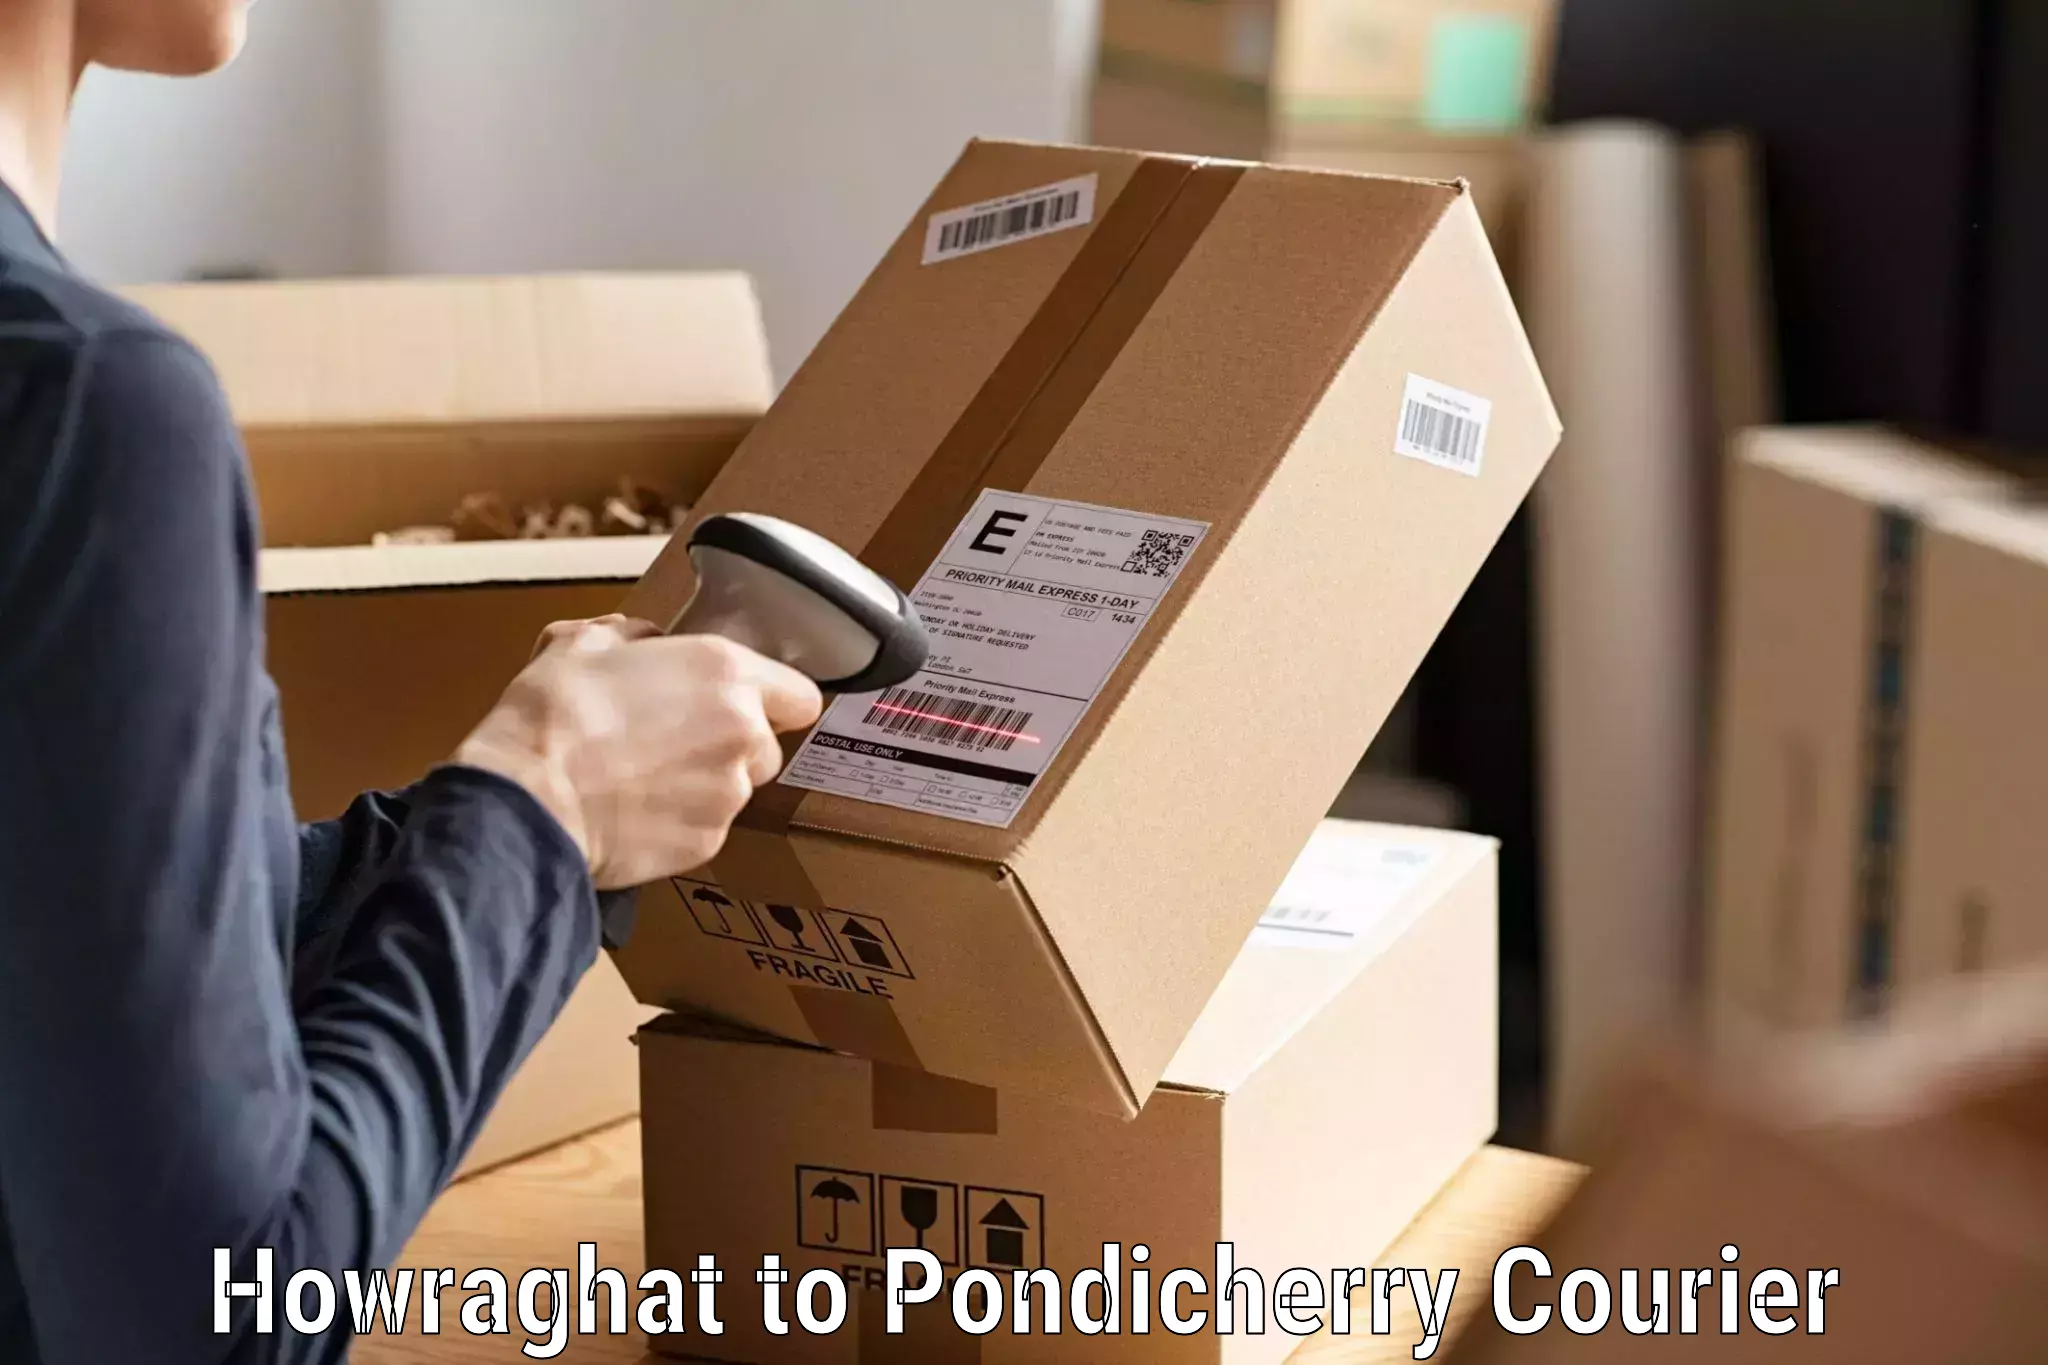 Modern courier technology Howraghat to Pondicherry University